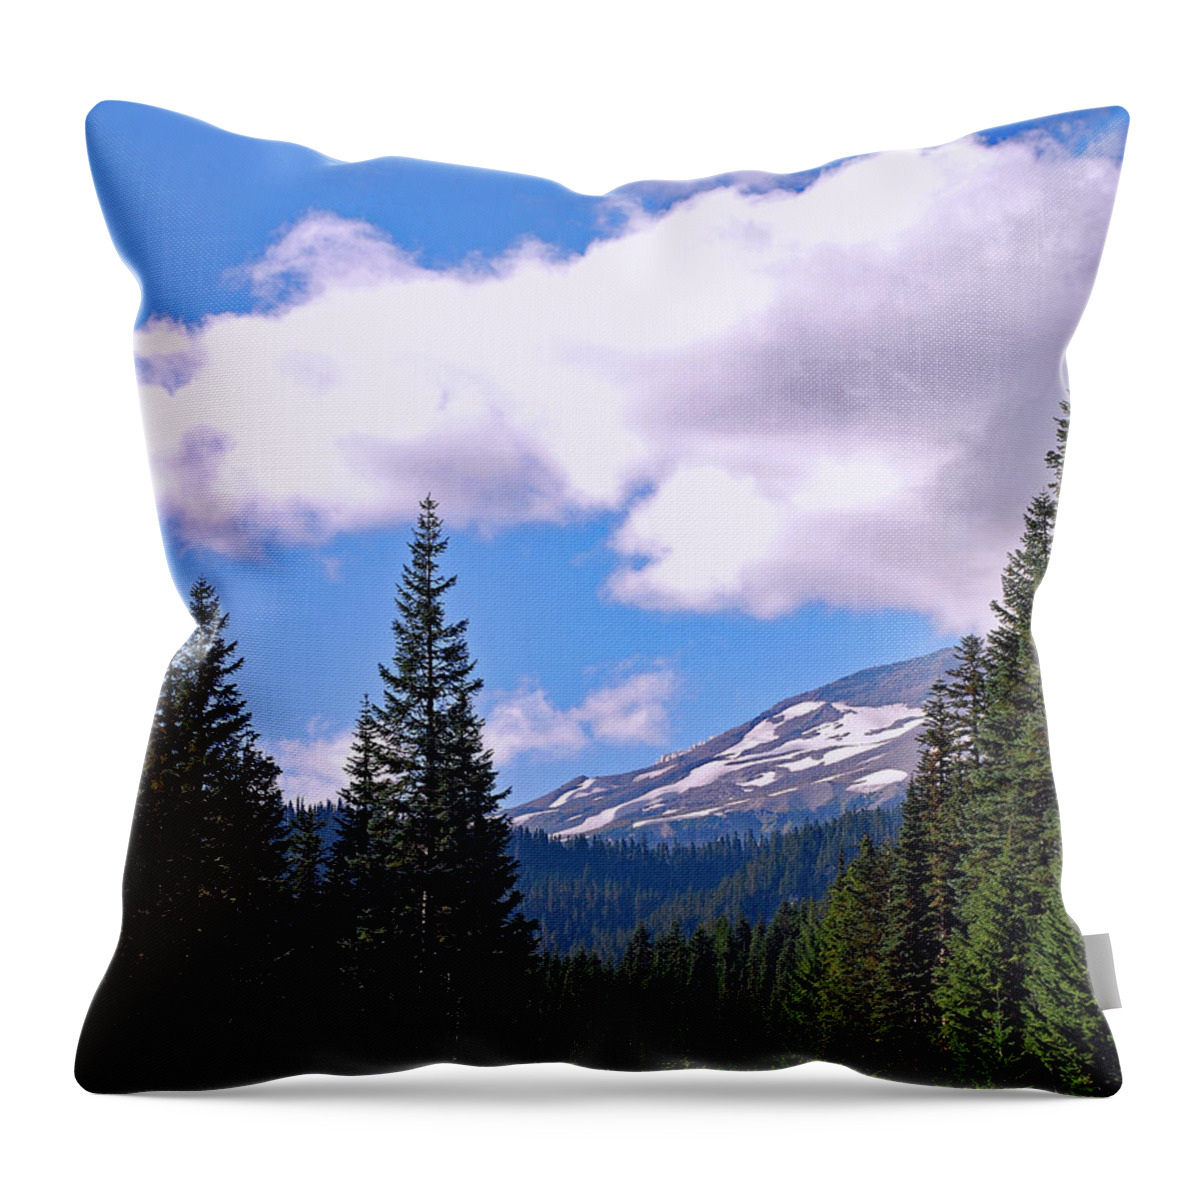 Glaciers Throw Pillow featuring the photograph Mount Rainier National Park by Connie Fox